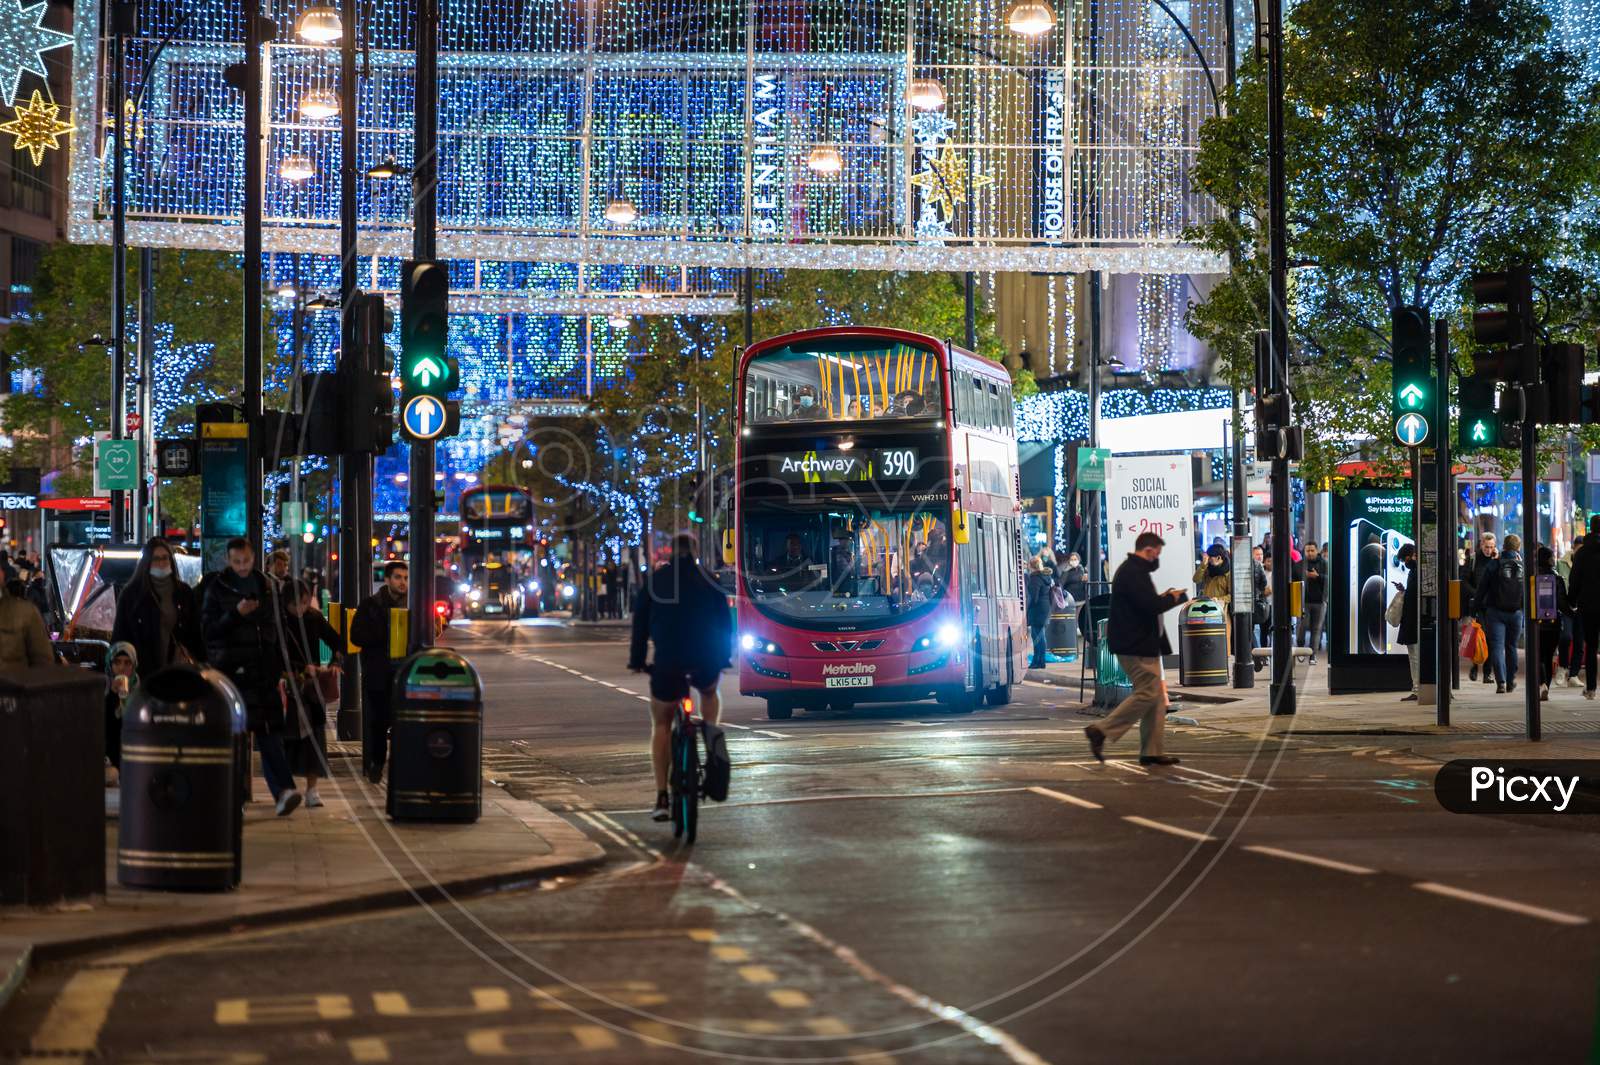 Red London Double Decker Bus Pulling Away From Bus Stop On Oxford Street Illuminated By Christmas Lights